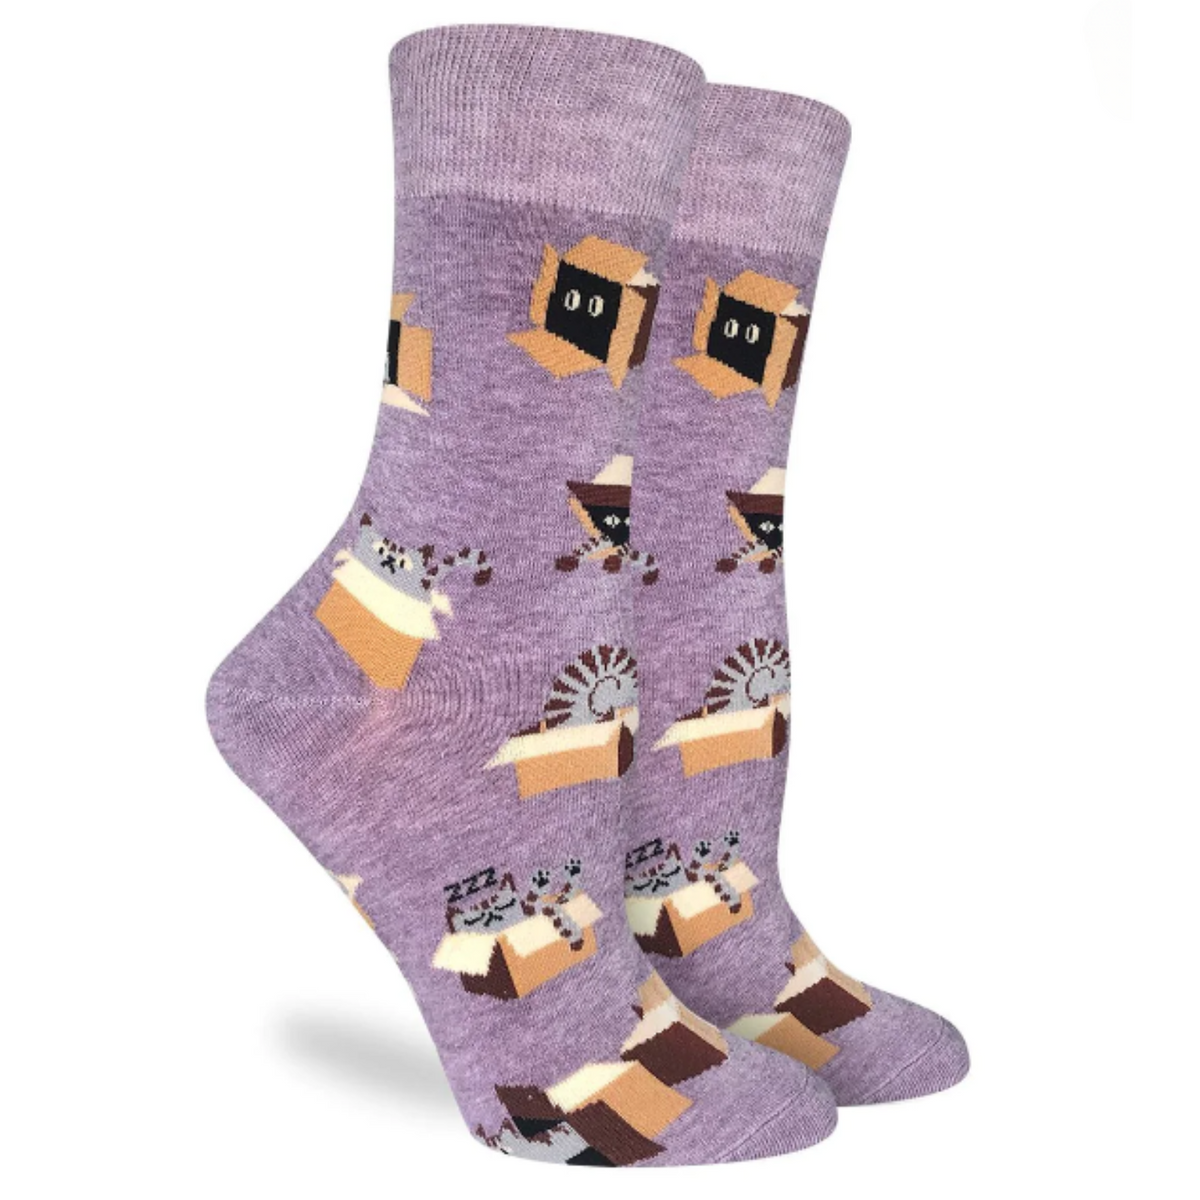 Good Luck Sock Cat In A Box women&#39;s crew sock featuring purple socks with cats playing in boxes all over. Socks shown on model&#39;s feet. 